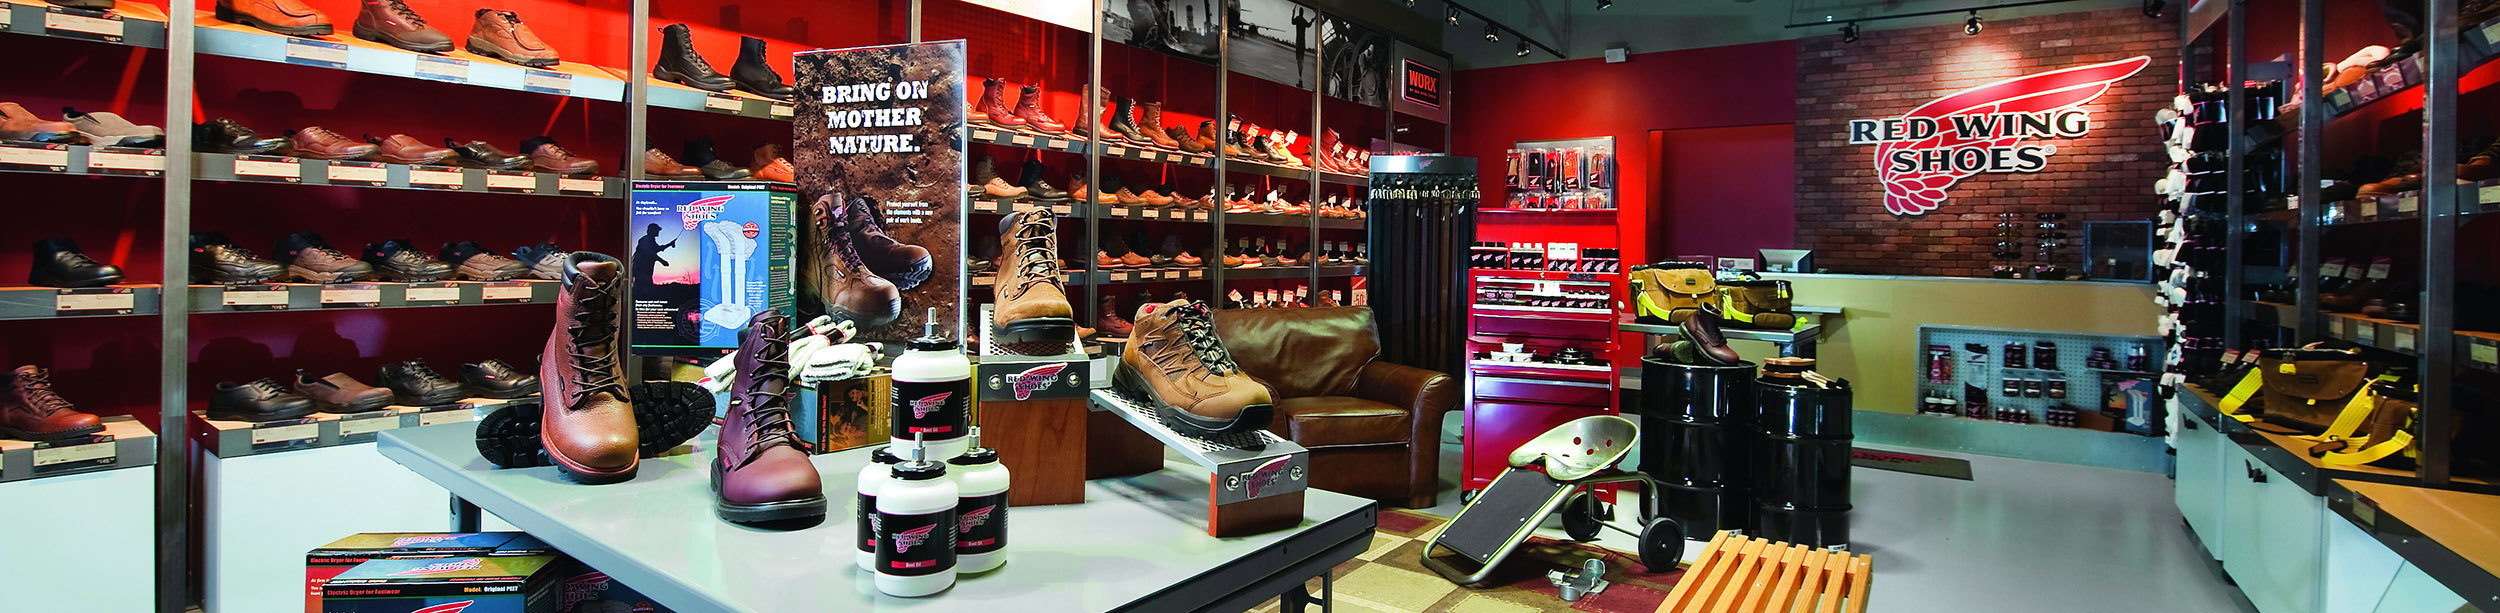 red wing shoes shop